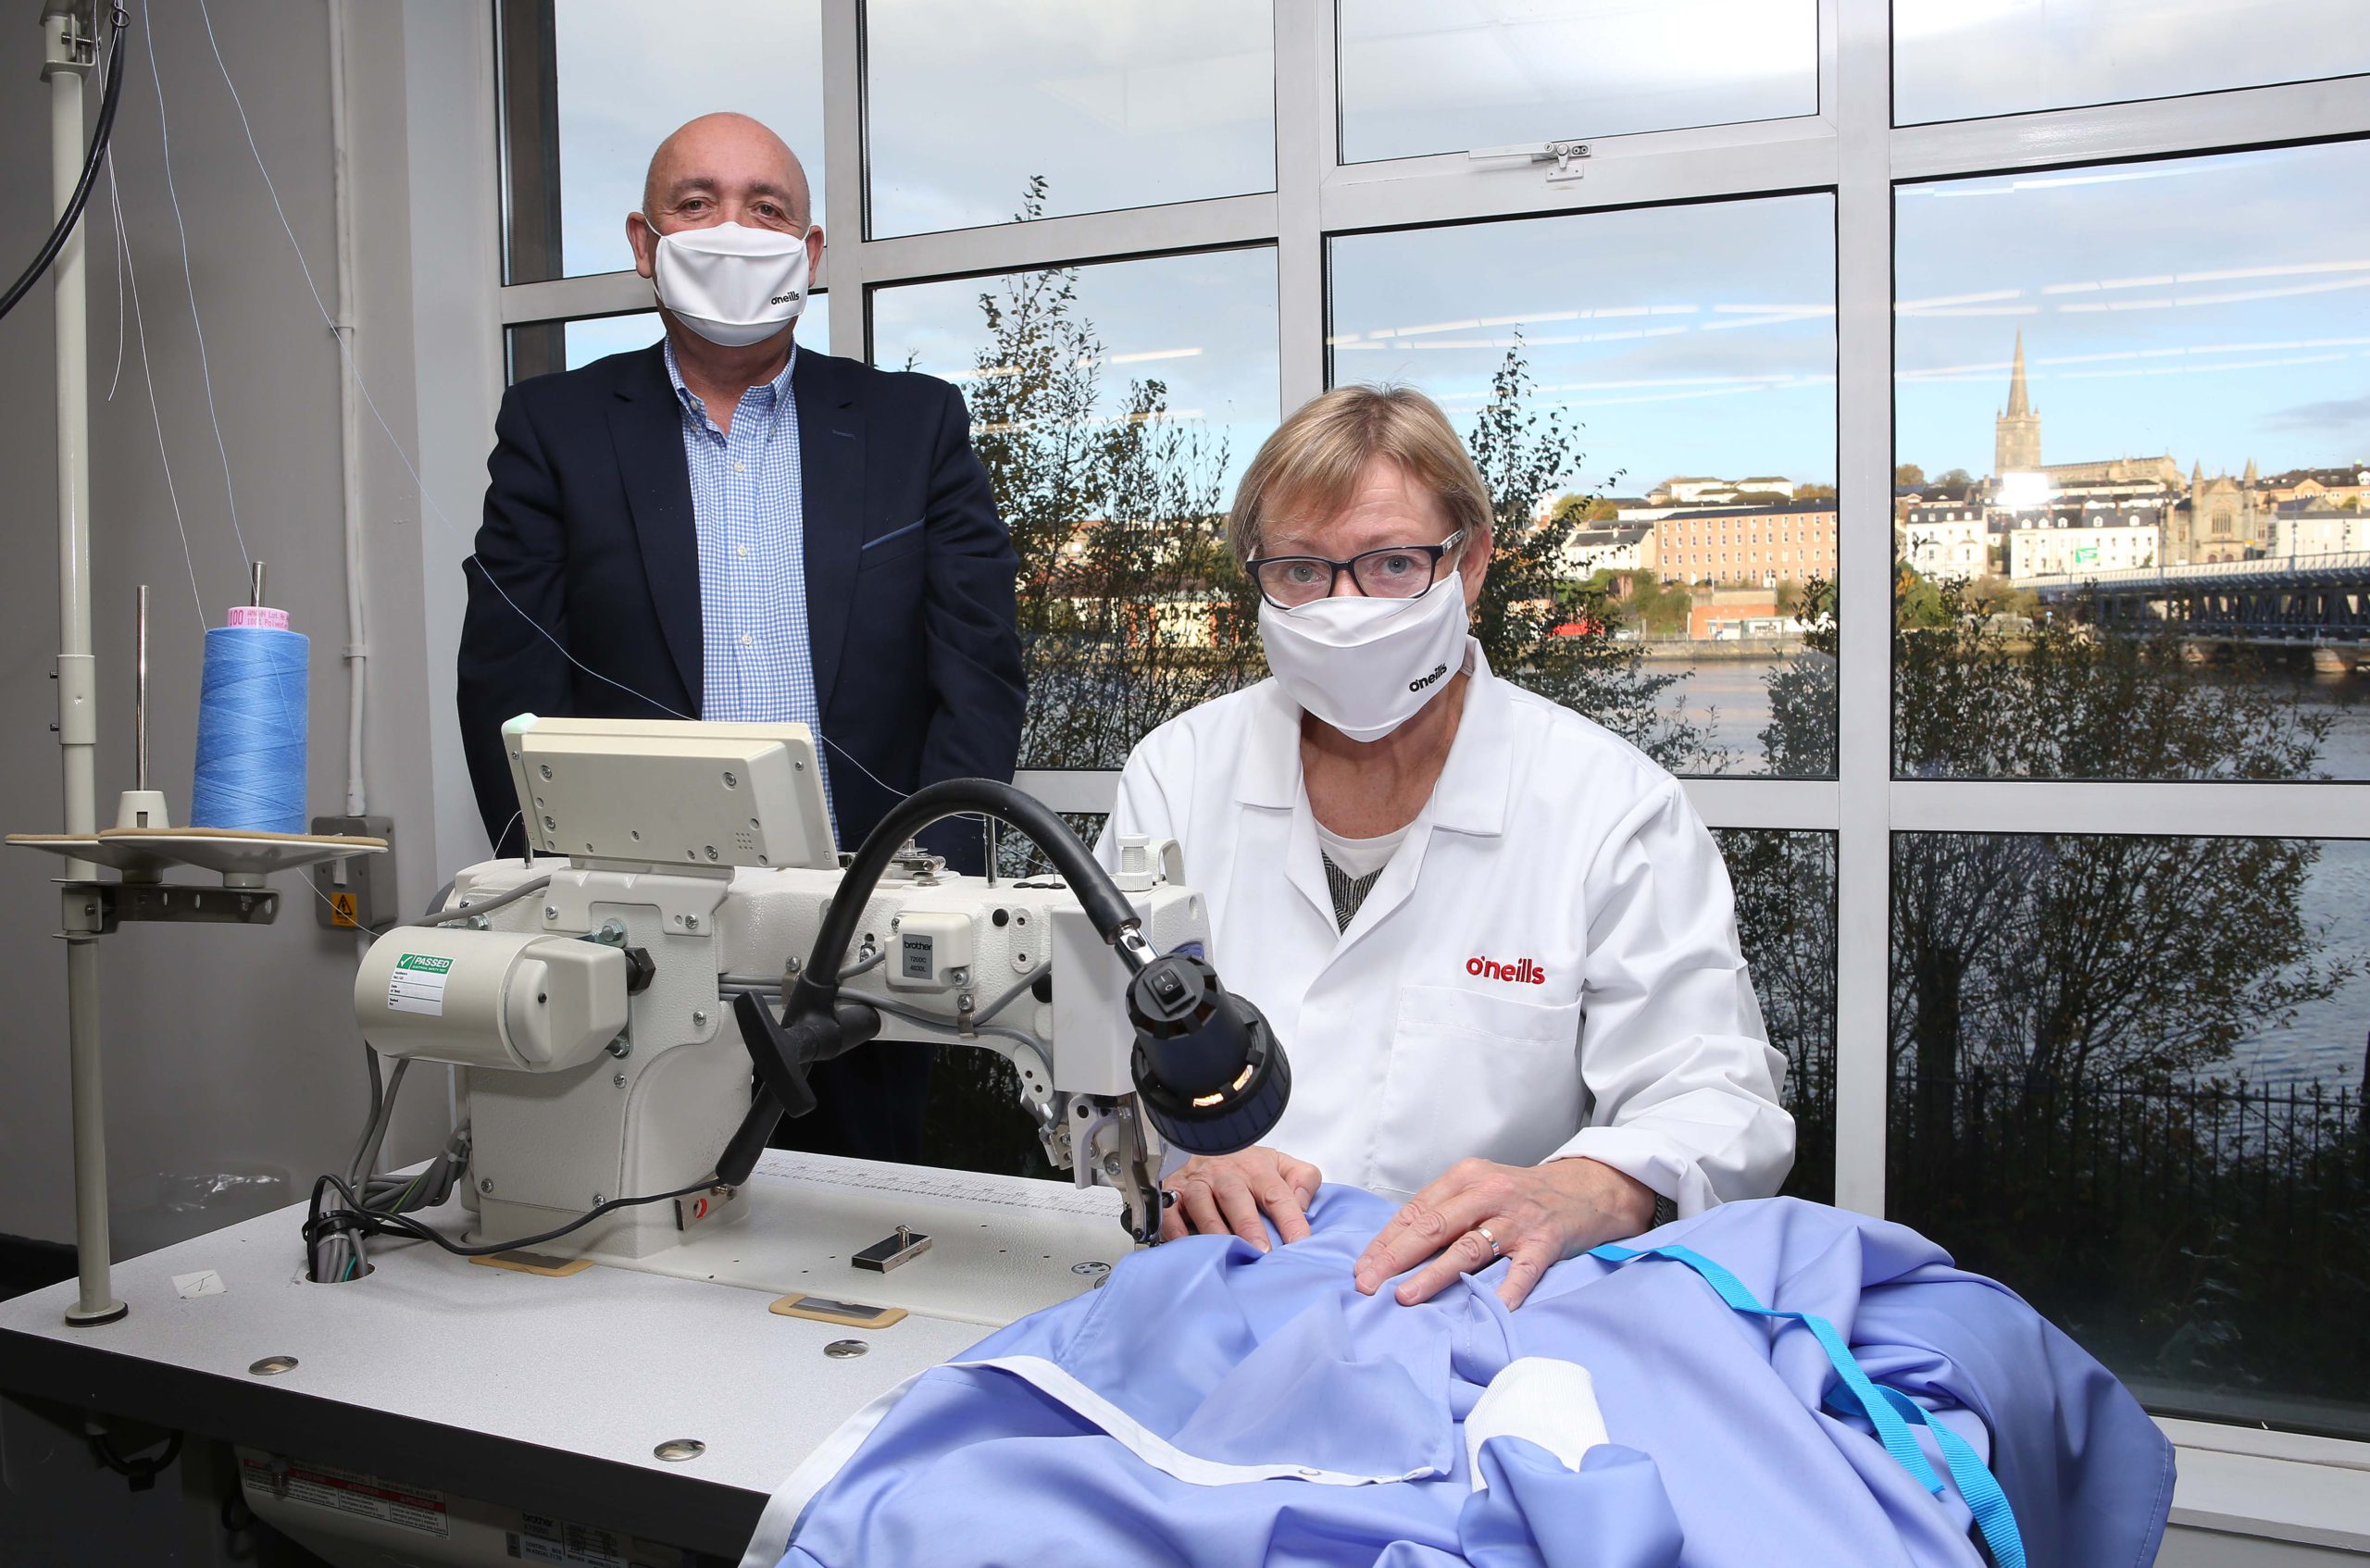 O’Neills to manufacture reusable medical isolation gown